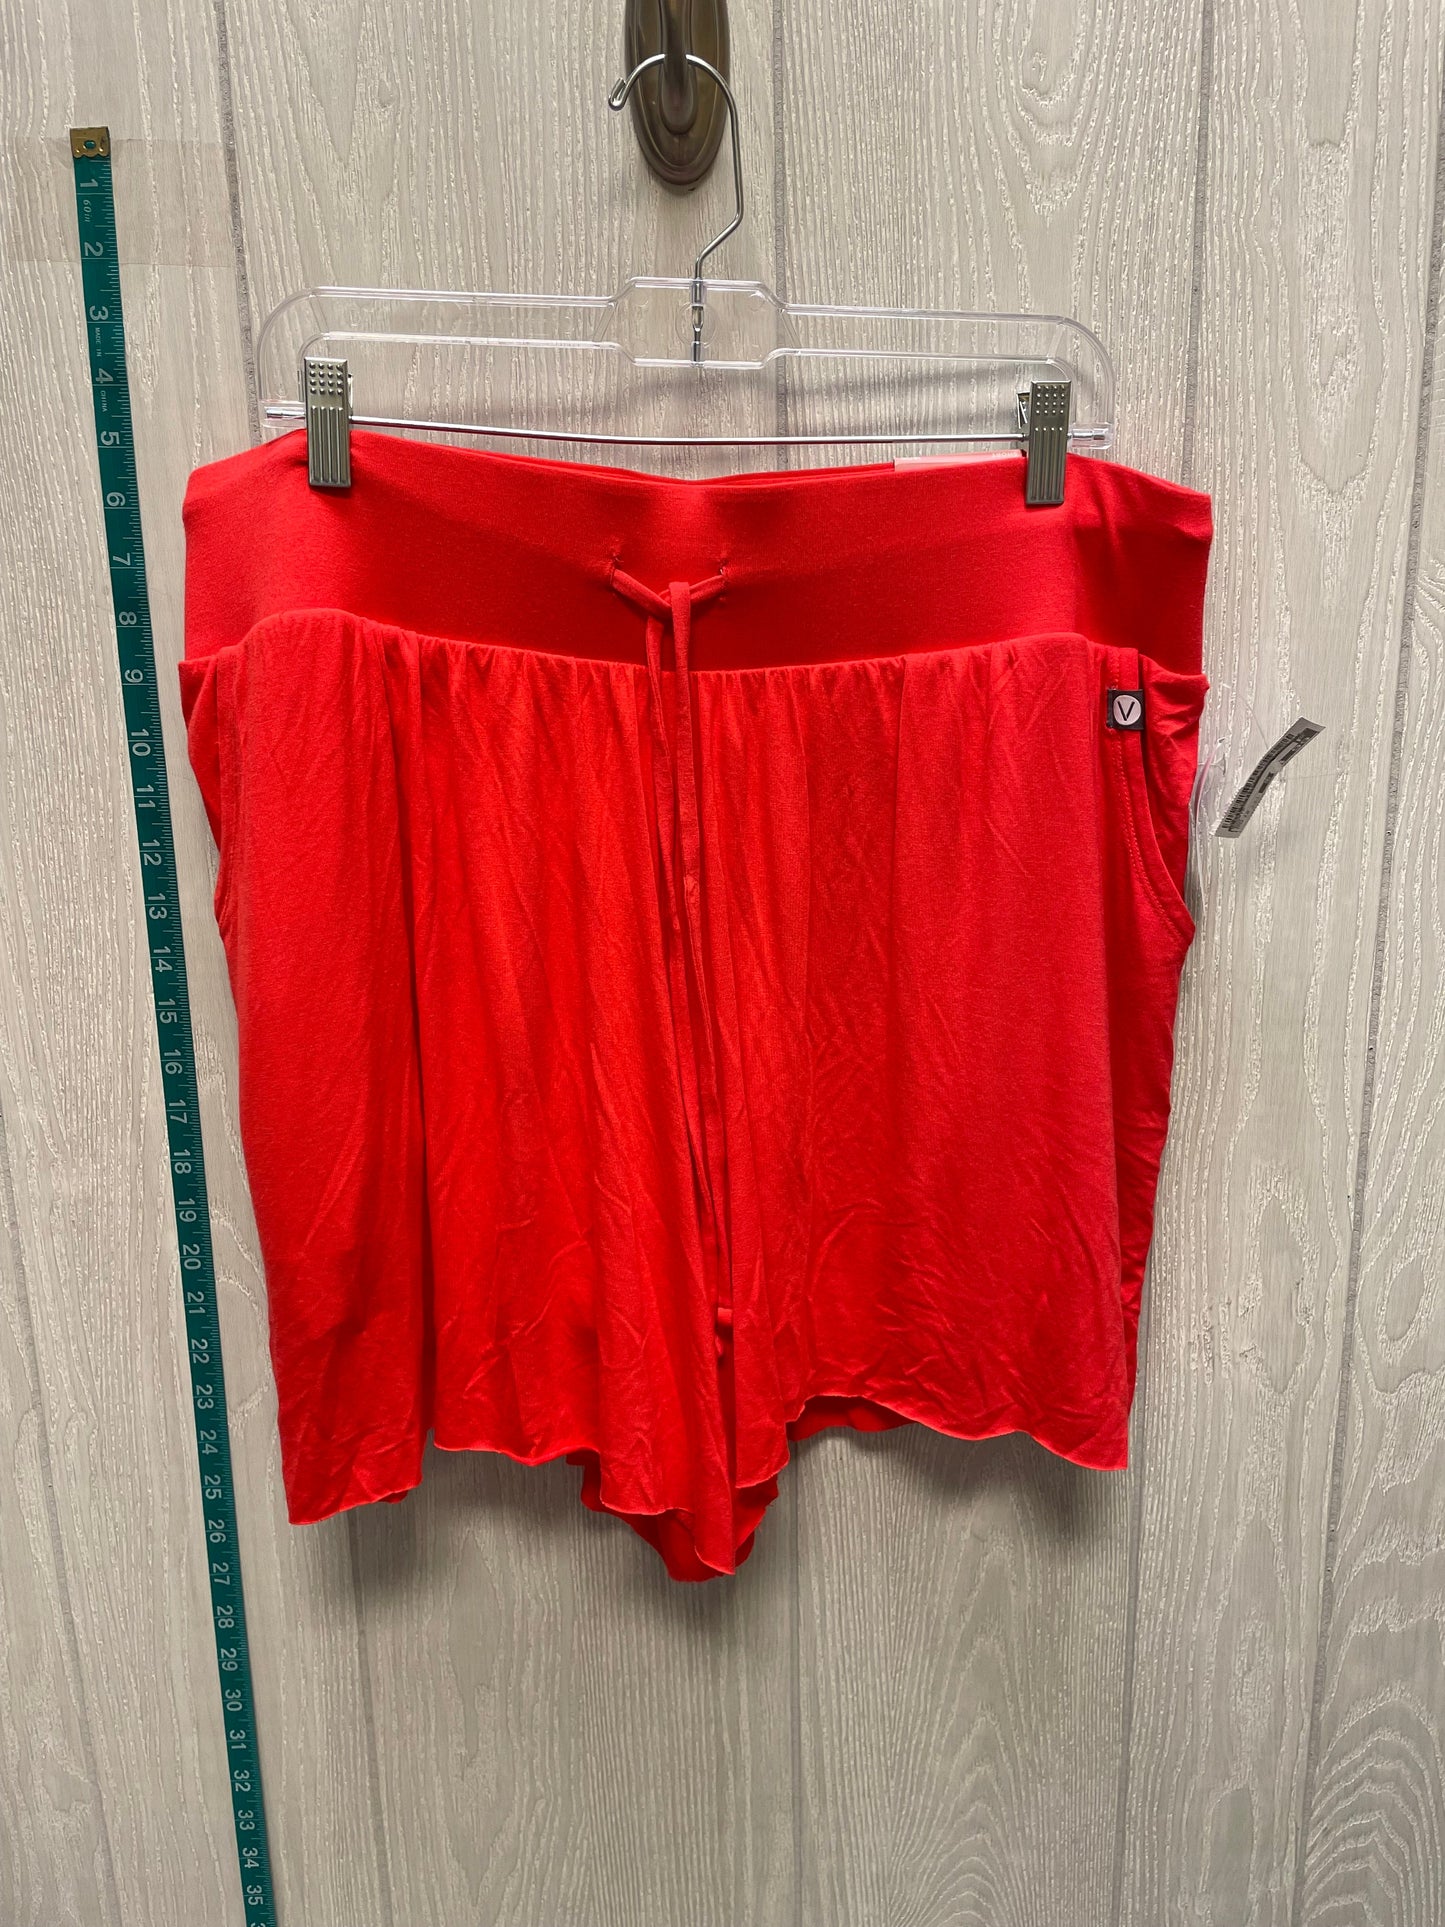 Red Shorts Livi Active, Size 18